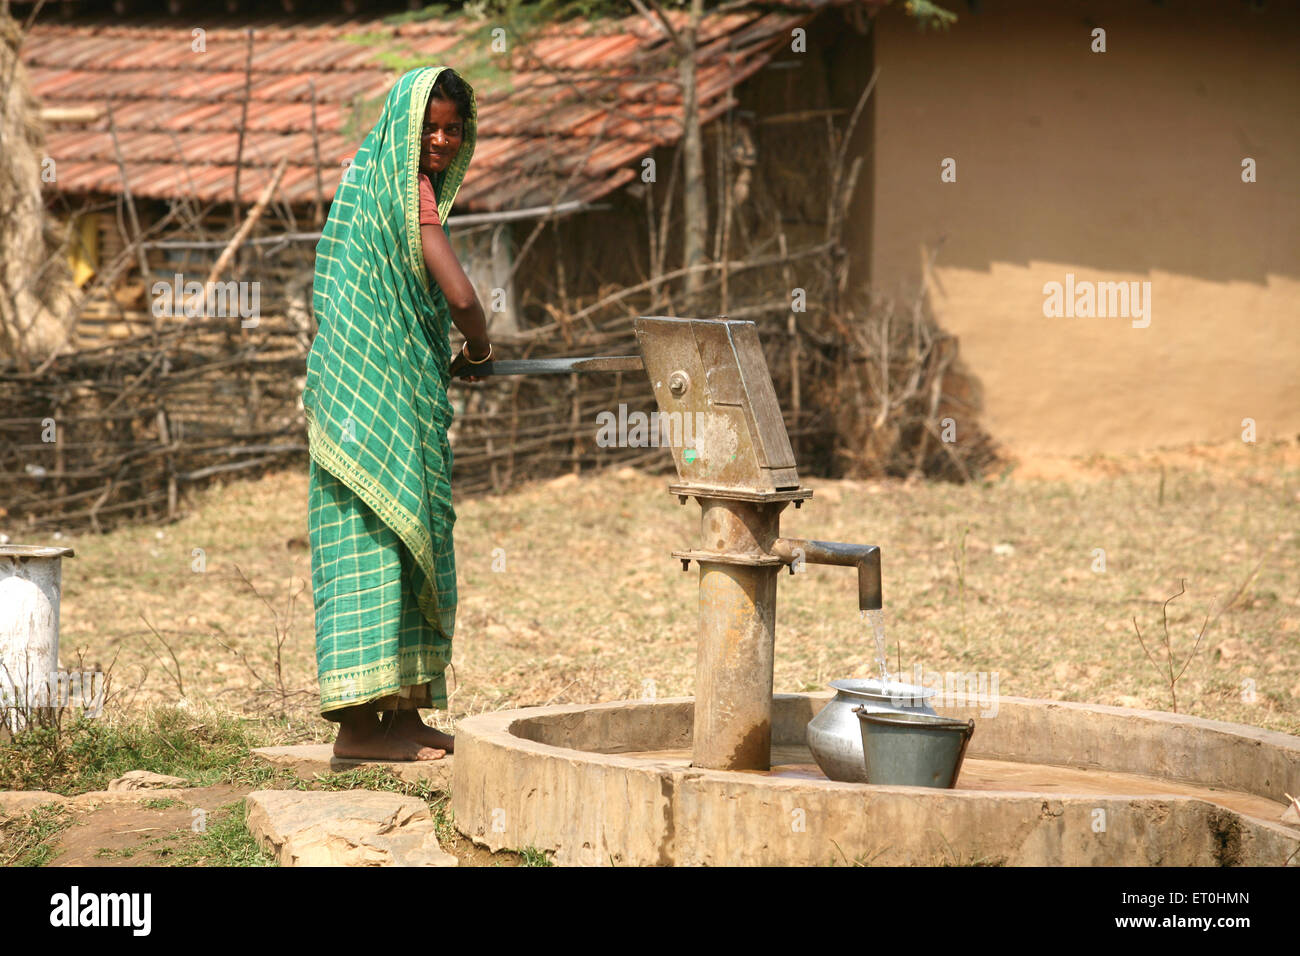 Indian rural woman filling water pot from village hand pump, Ranchi, Jharkhand, India Stock Photo